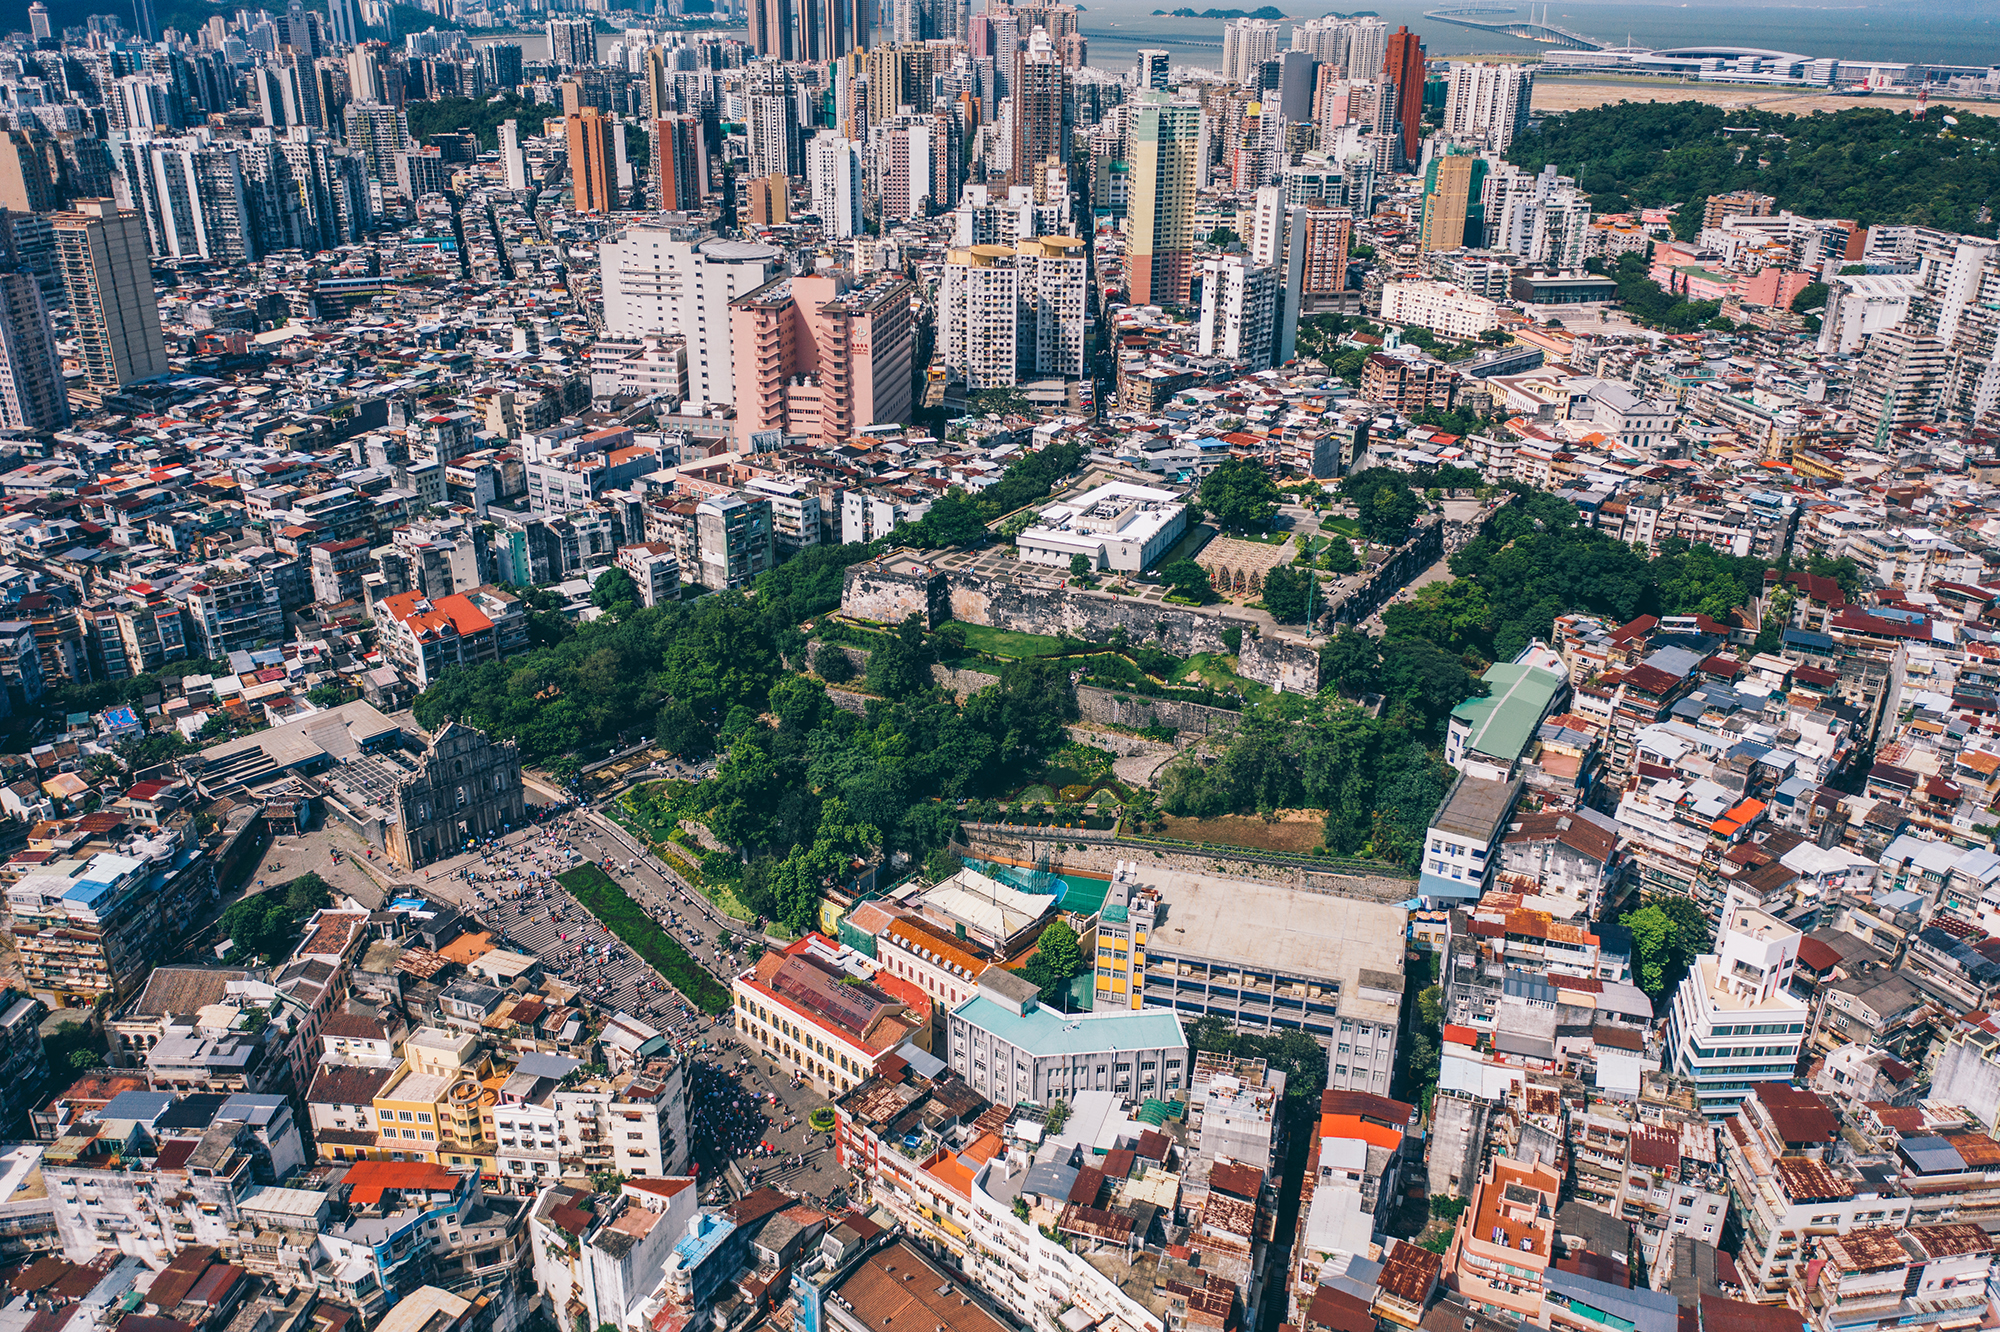 Aerial view of Macao